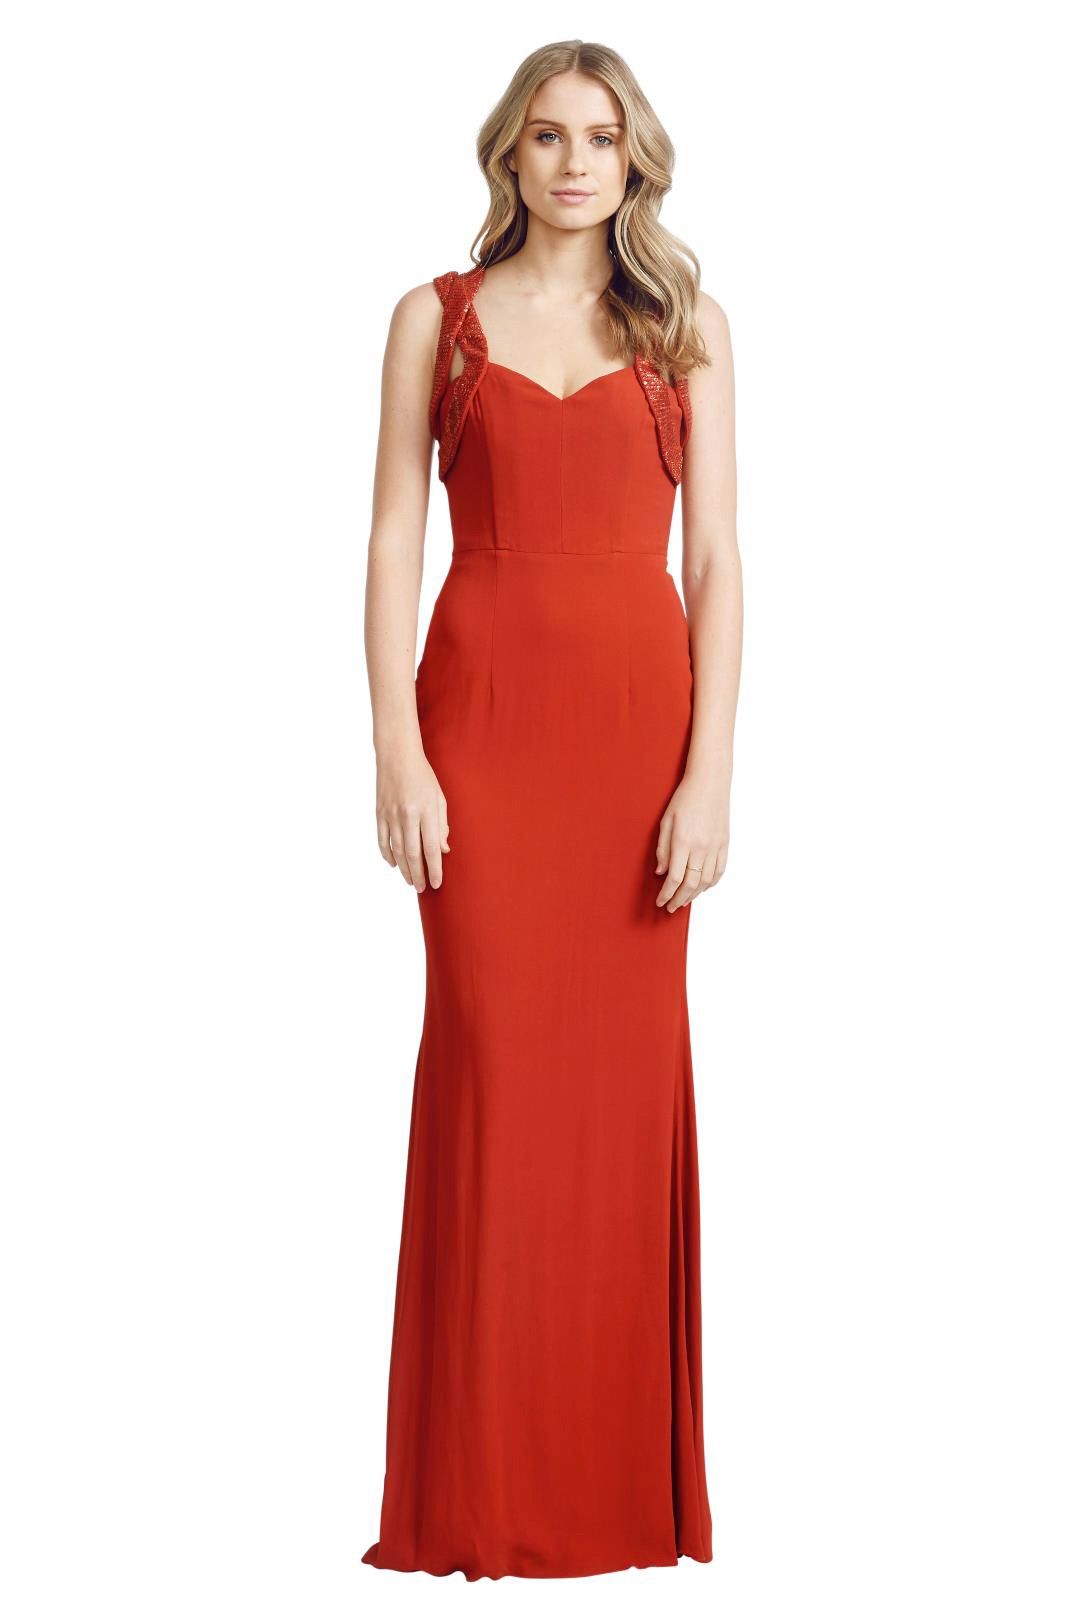 Alex Perry - Nadia Gown - Red - Front